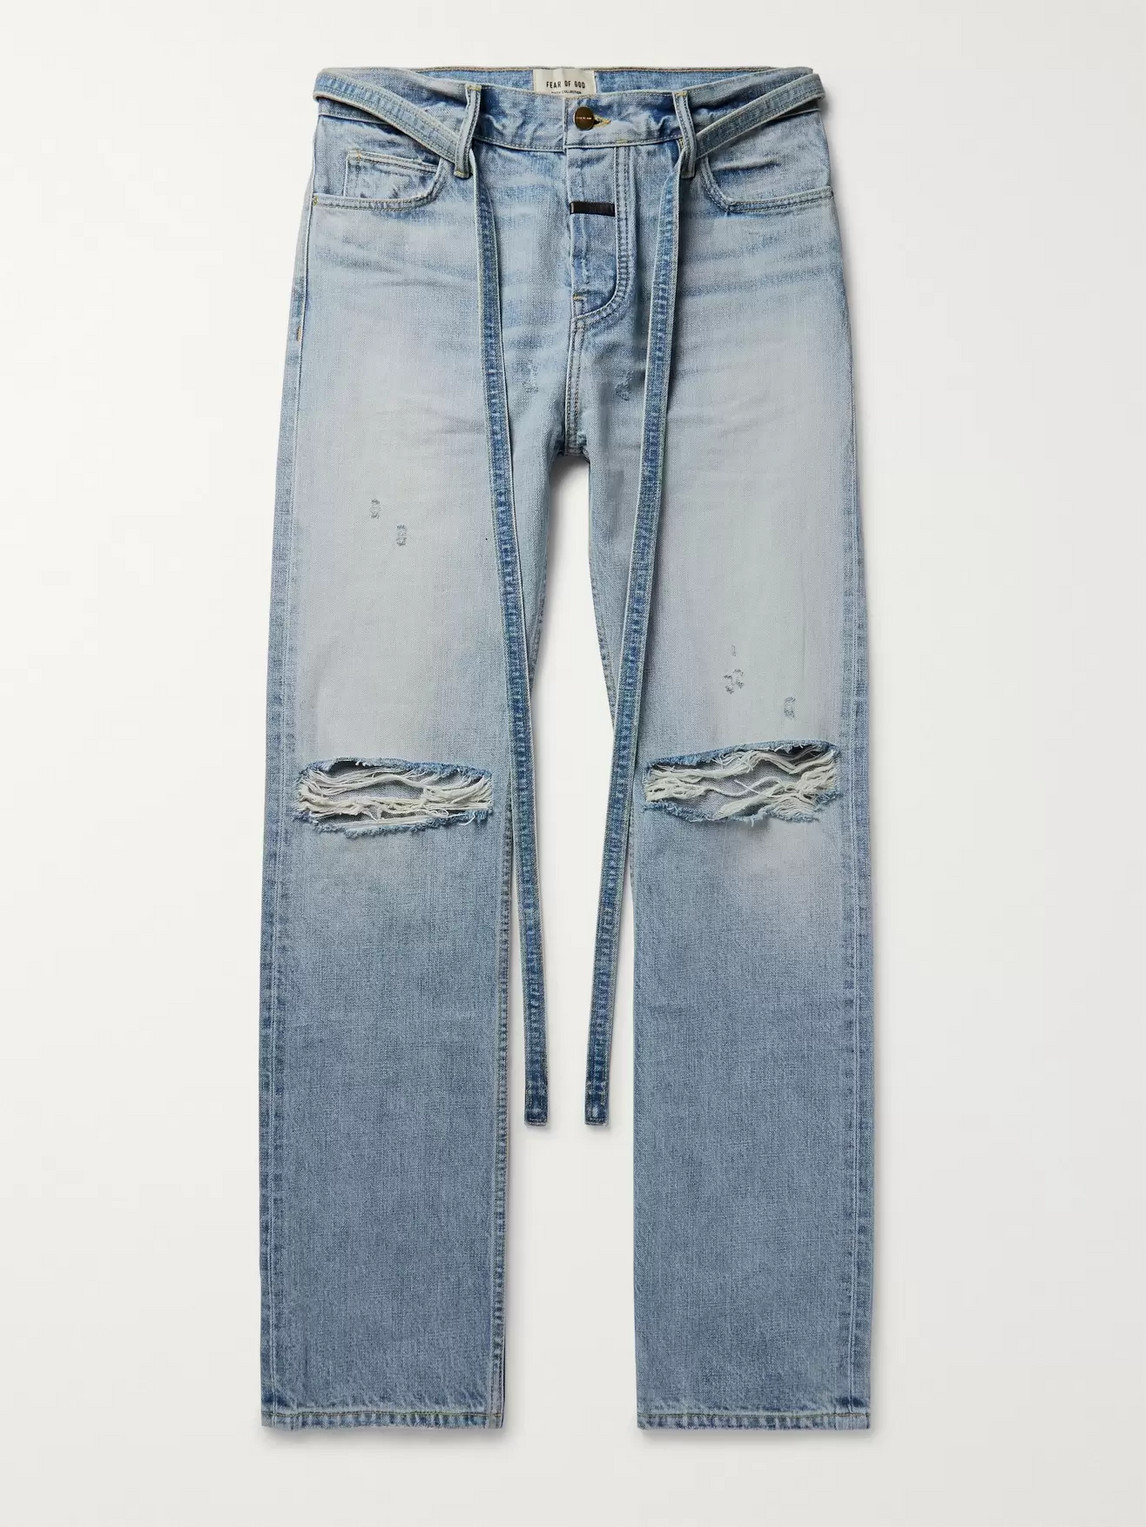 FEAR OF GOD RELAXED-FIT BELTED DISTRESSED SELVEDGE DENIM JEANS